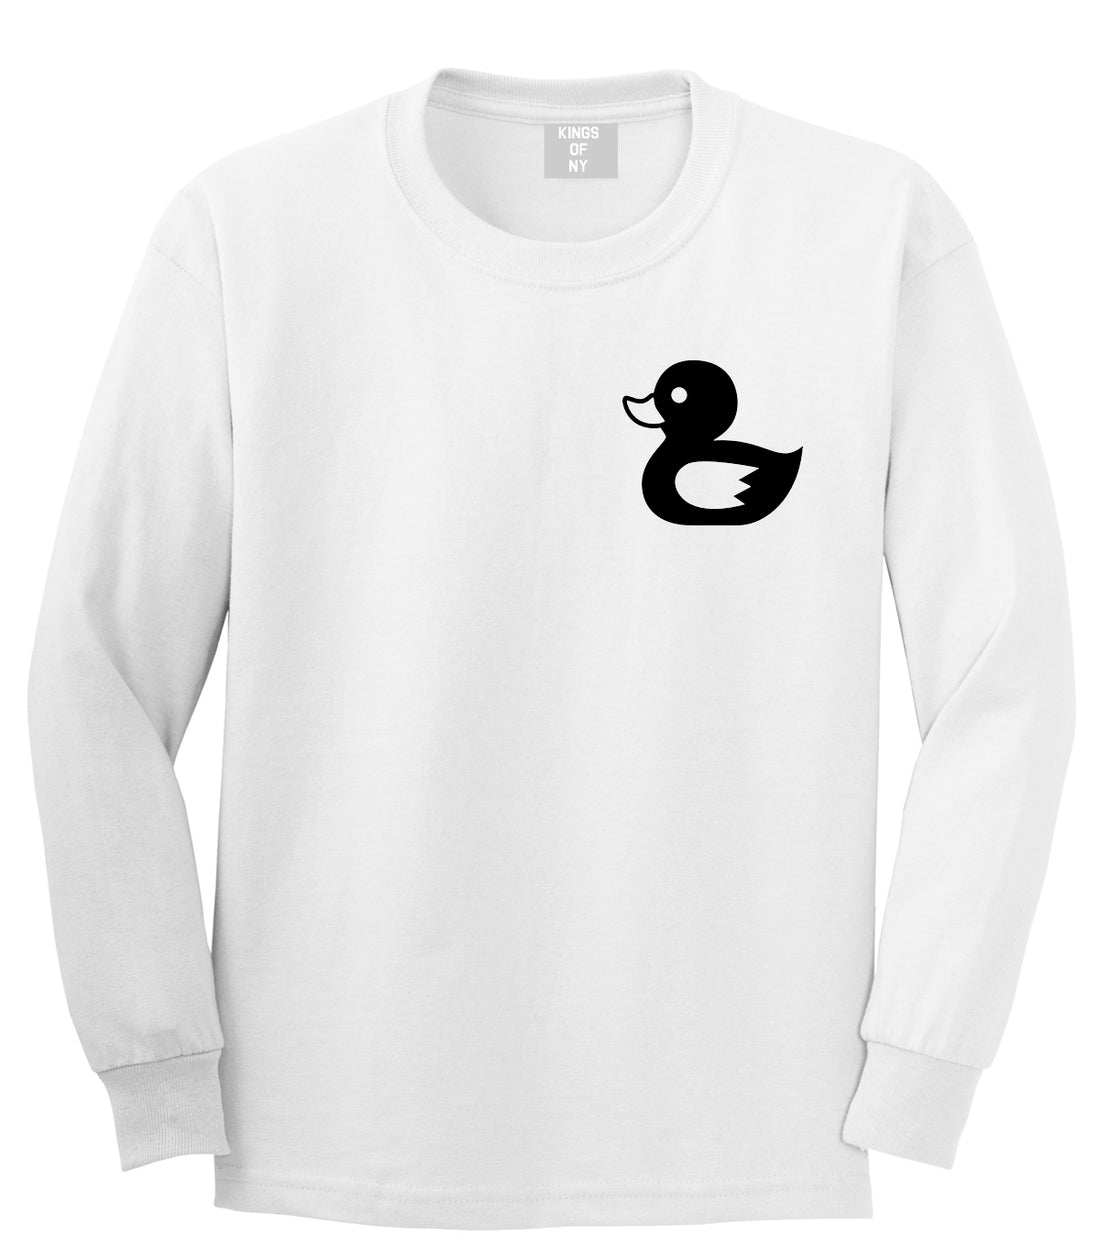 Rubber Duck Chest Mens White Long Sleeve T-Shirt by Kings Of NY